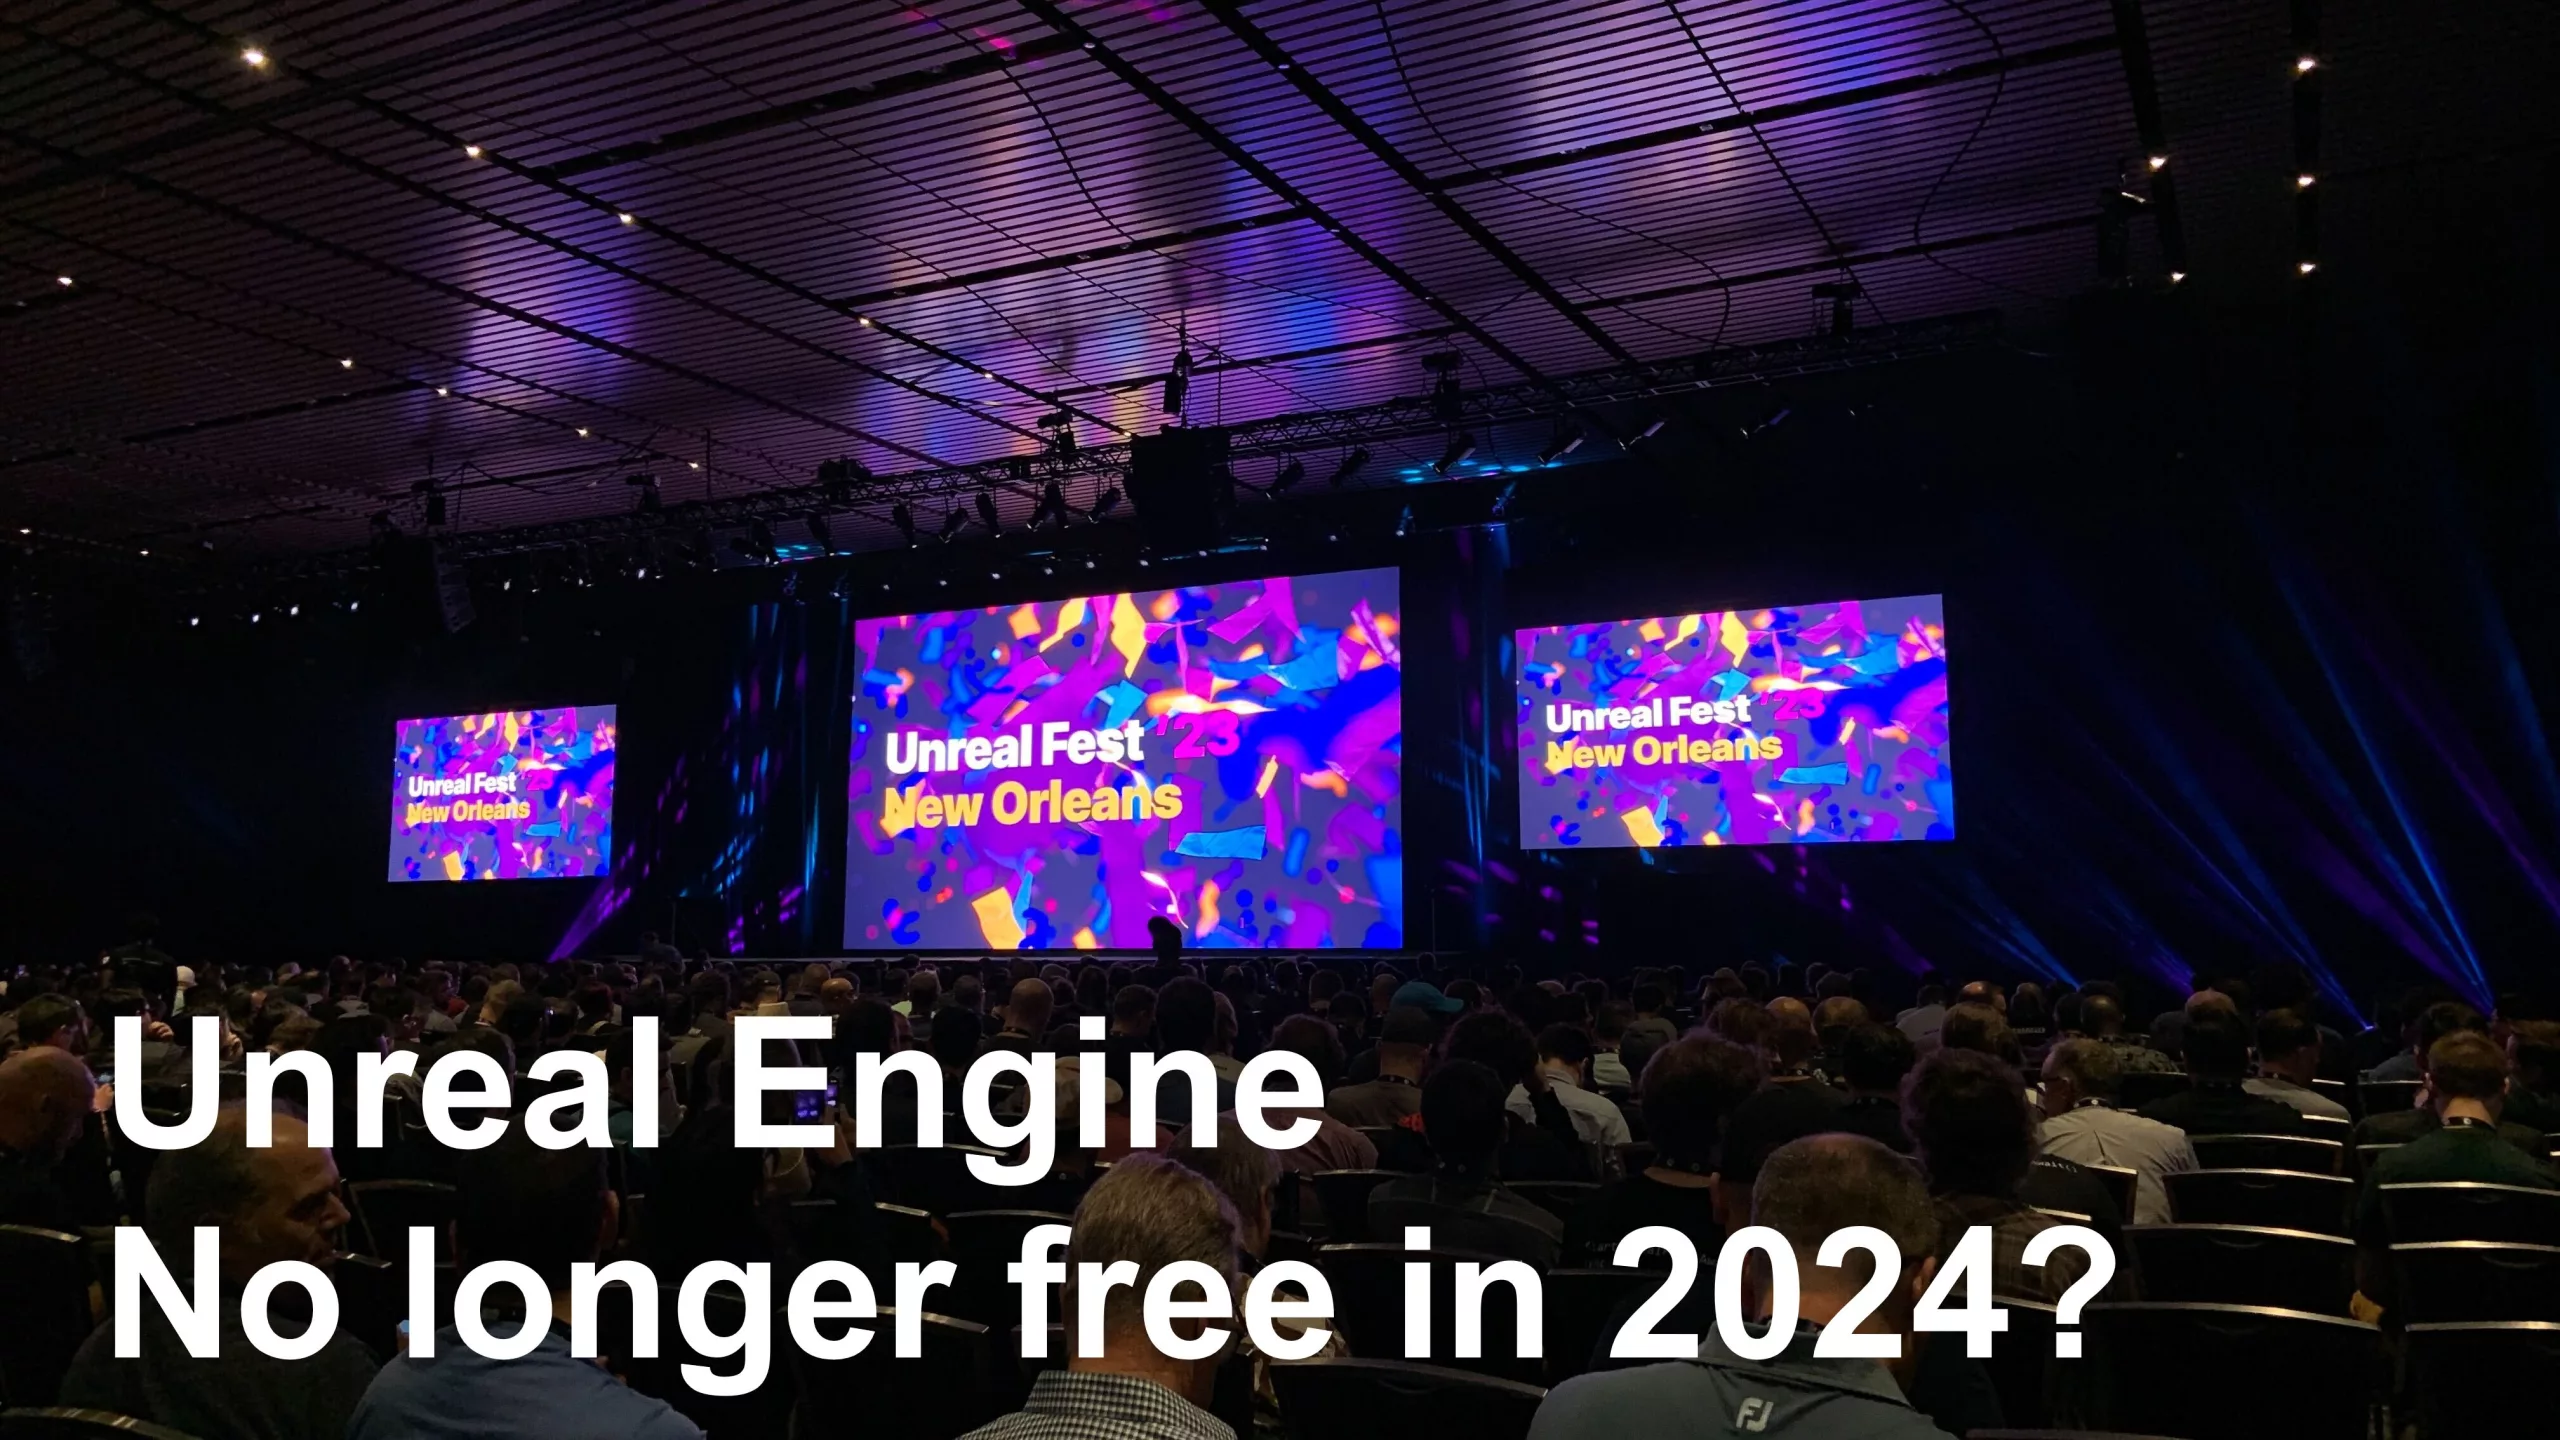 Epic announced fees coming to Unreal Engine in 2024